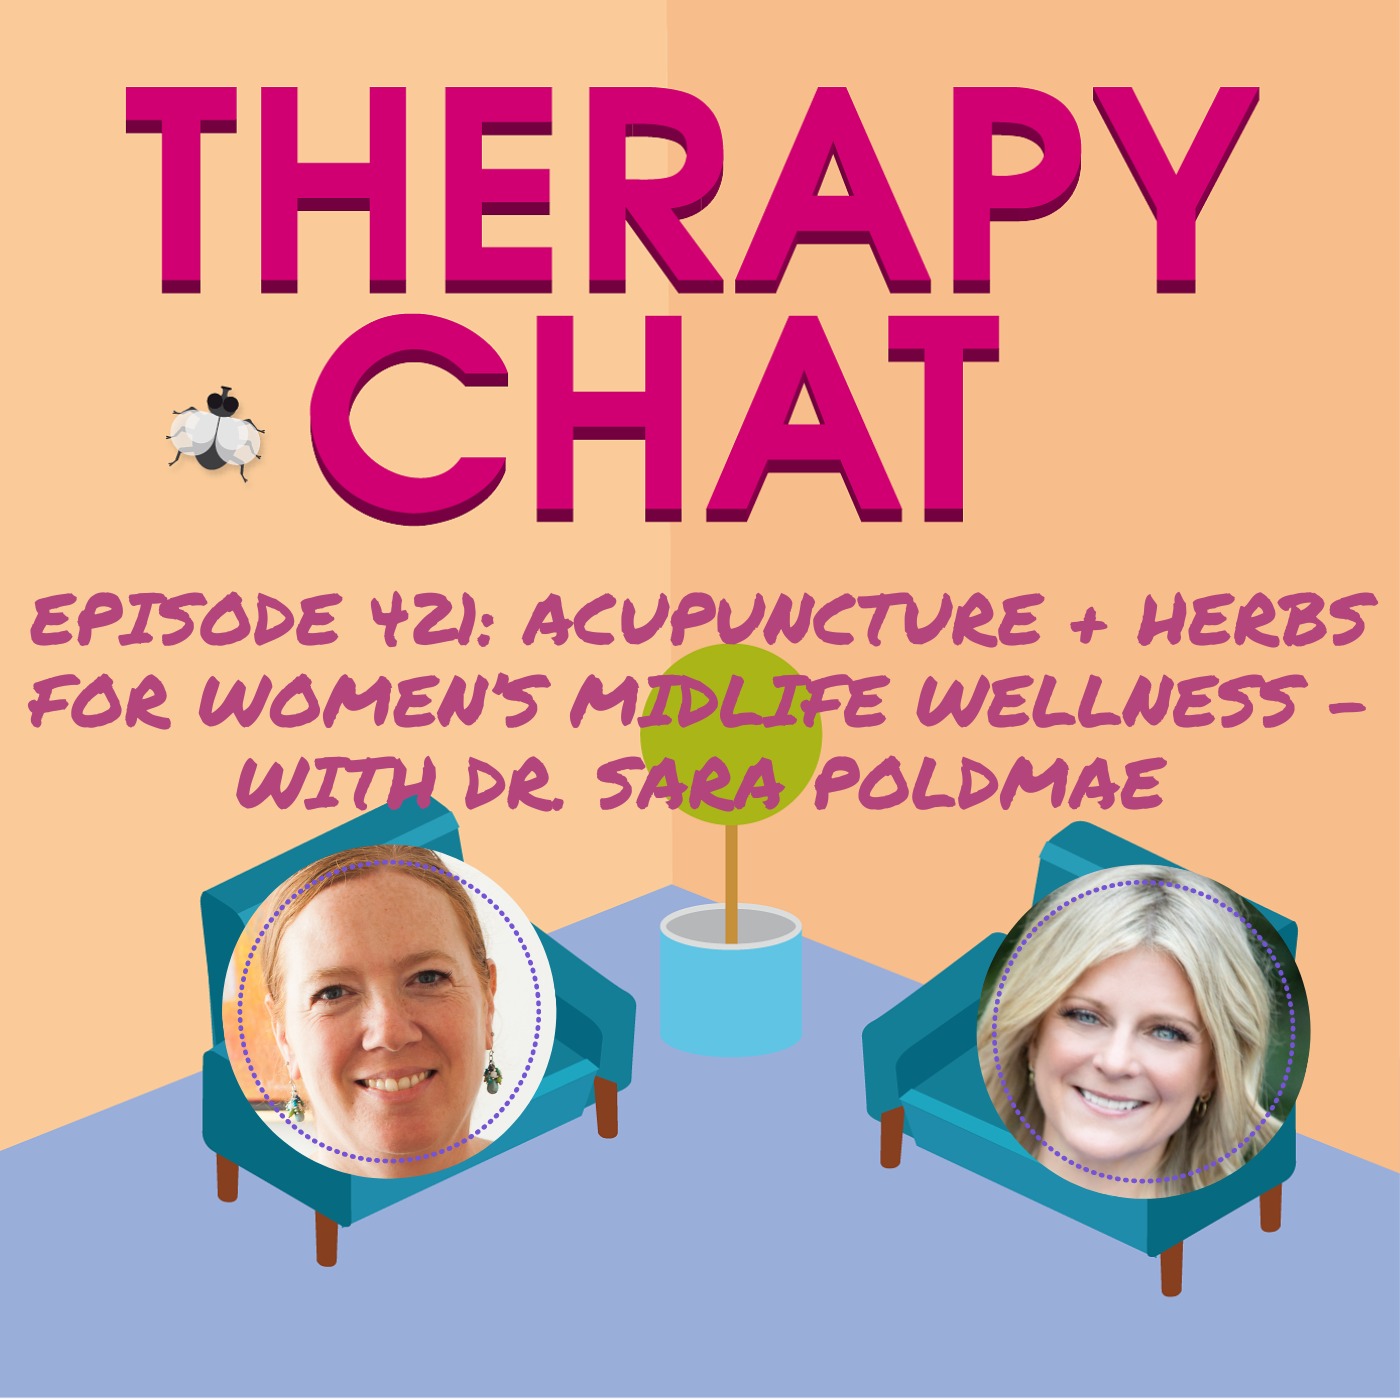 421: Acupuncture for Women's Midlife Wellness with Dr. Sara Poldmae